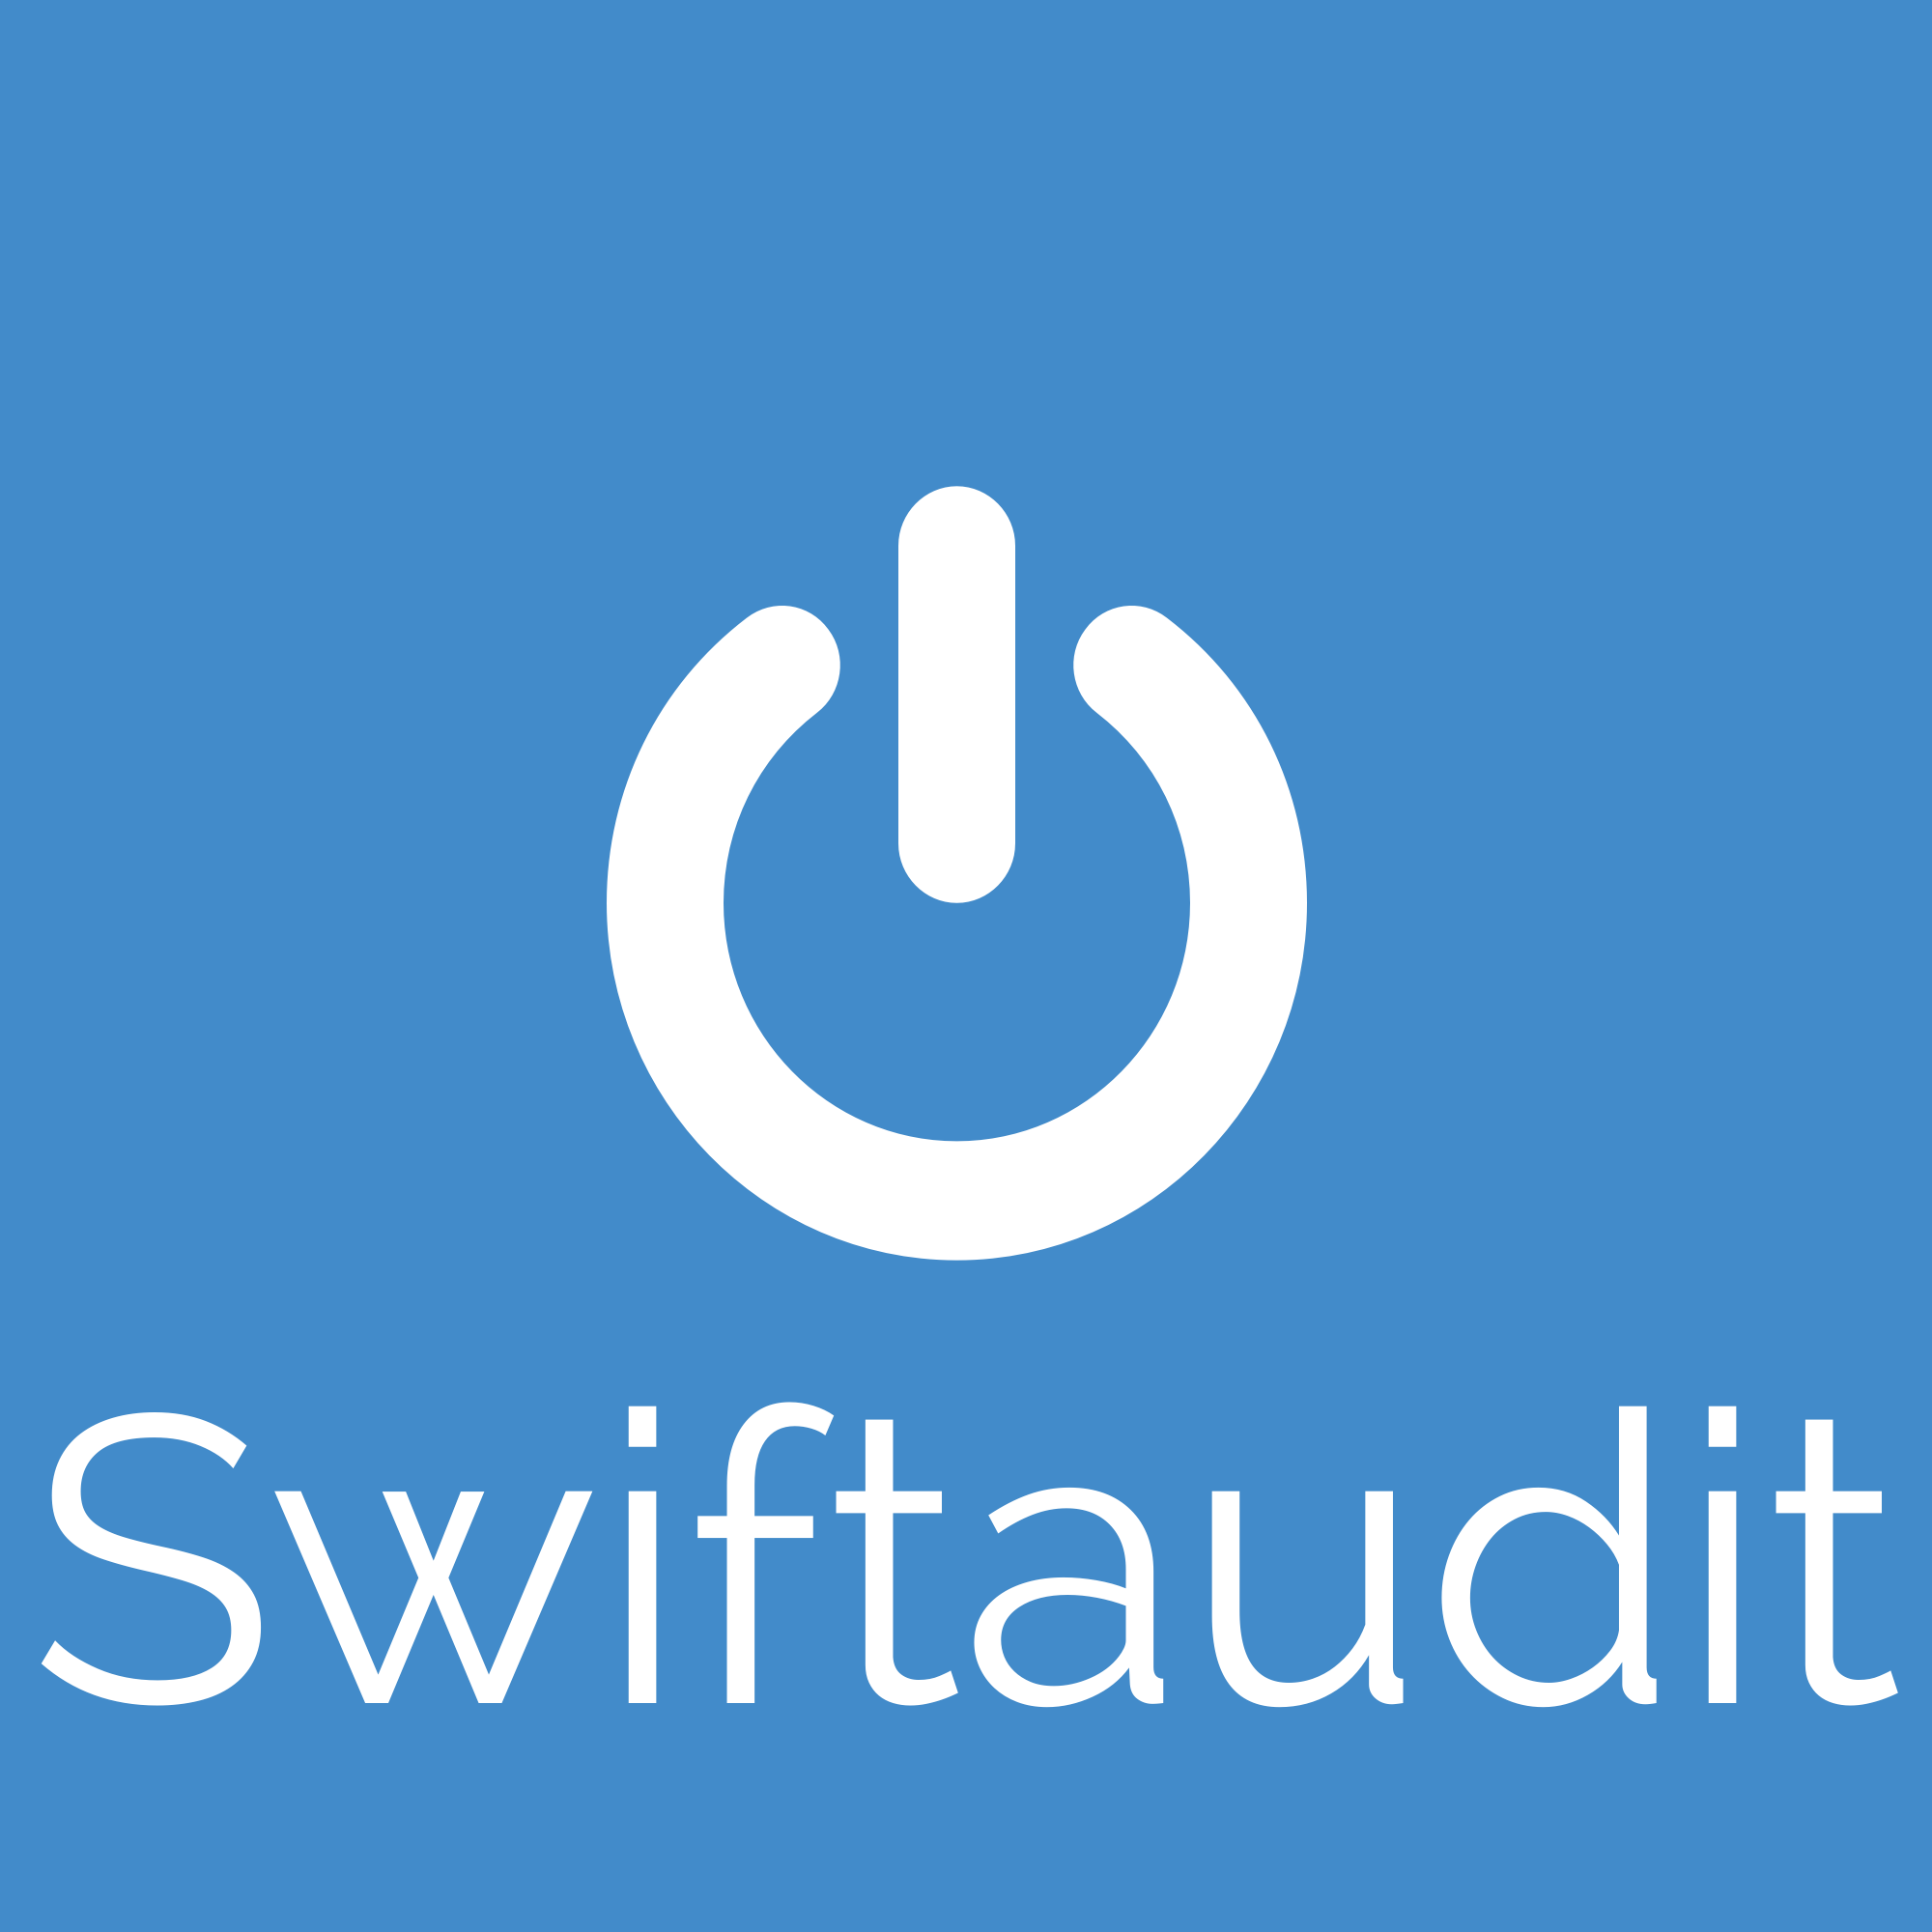 Spuare White and Blue Logo - Swiftaudit - Brand assets